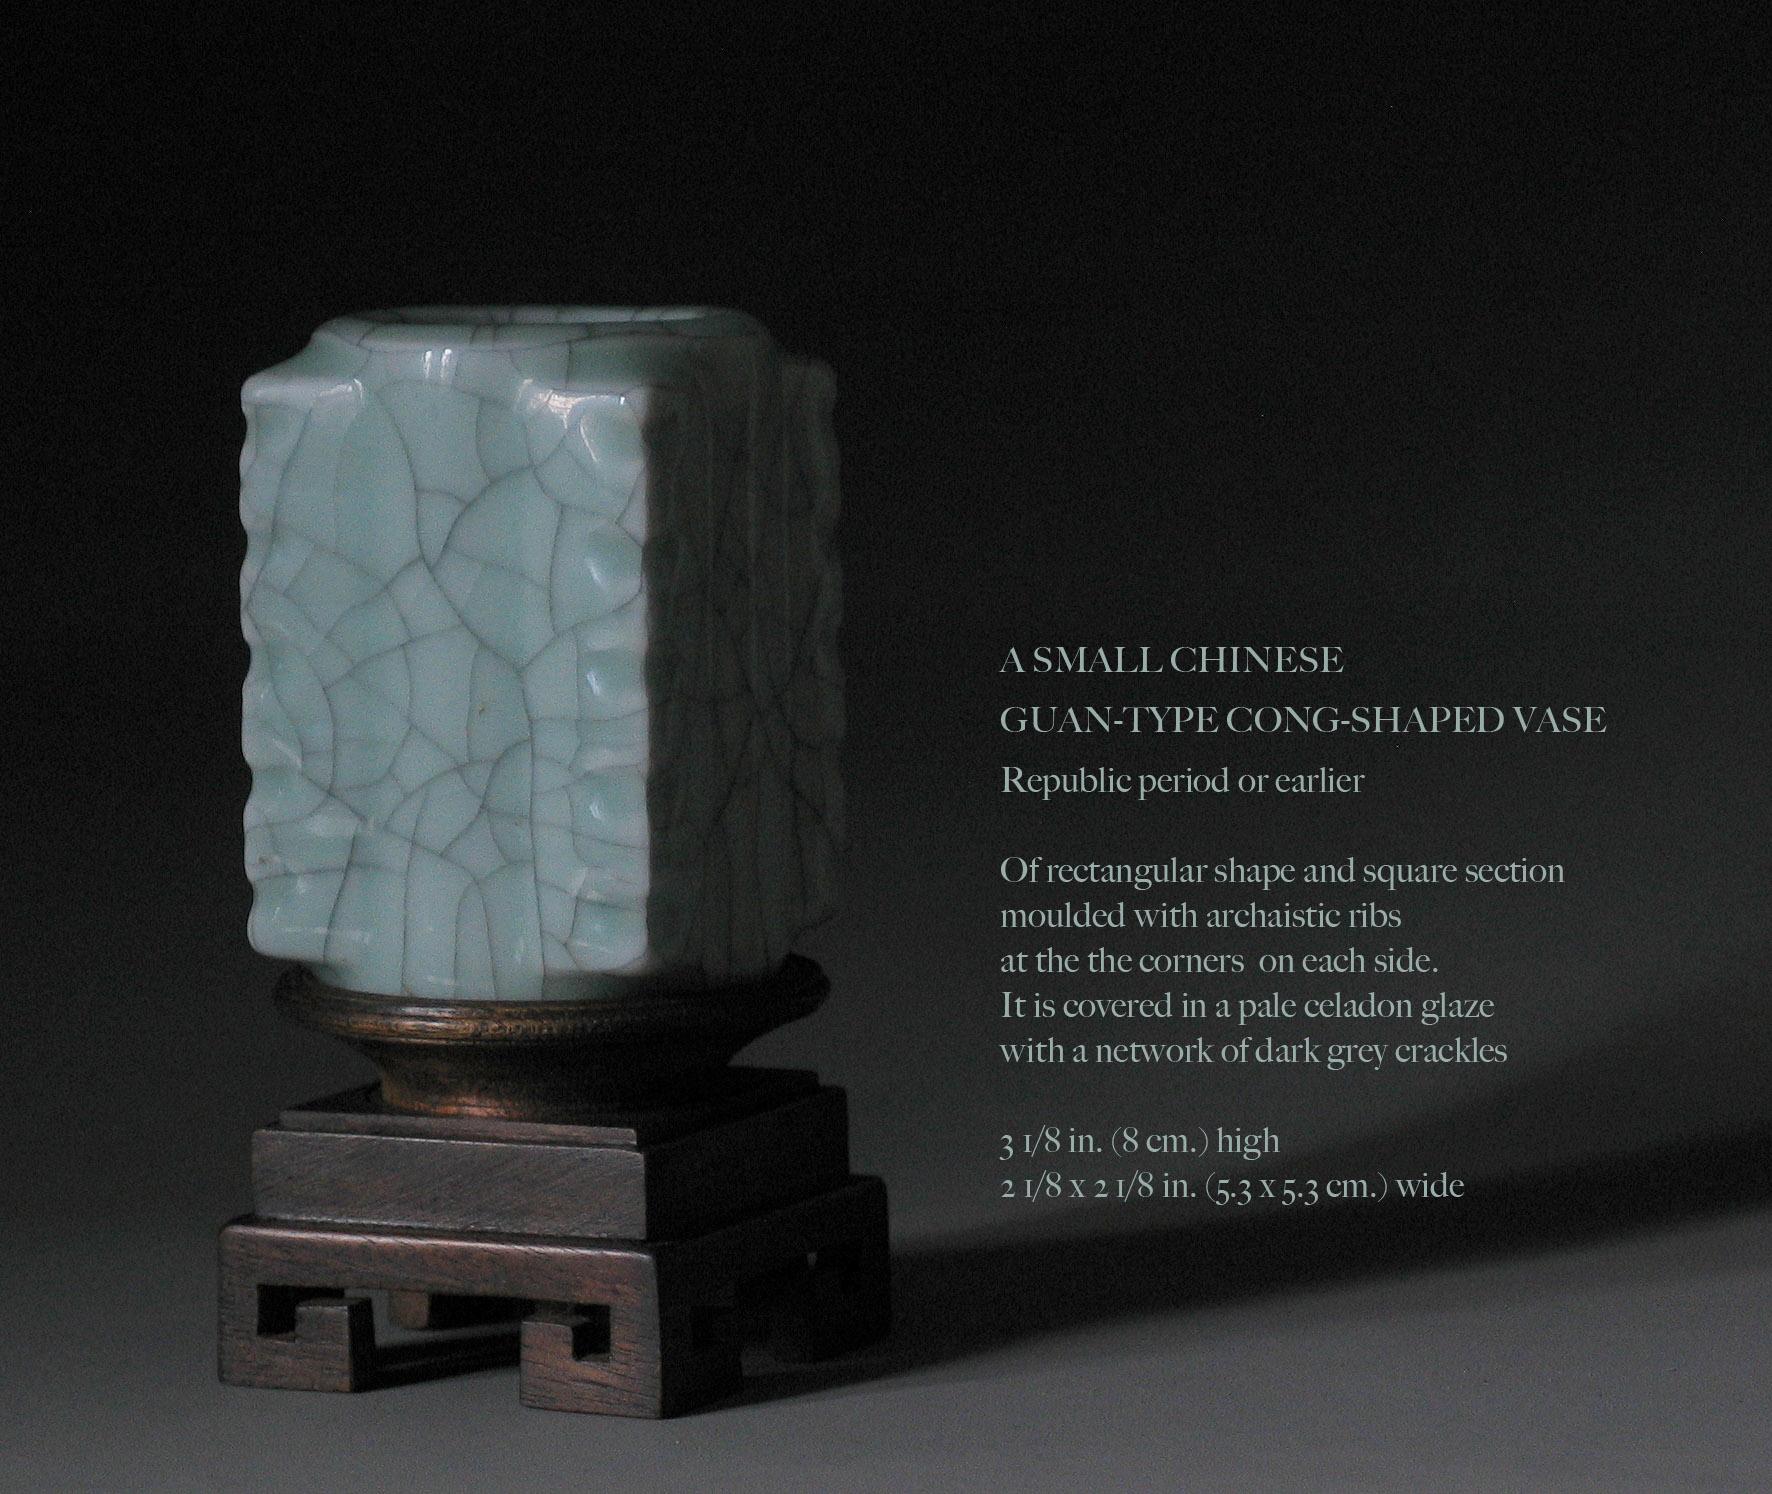 A small Chinese Guan-type Cong shaped vase on stand Republic period or earlier, of rectangular shape and square section molded with archaistic ribs at the corners of each side. It is covered in a pale celadon glaze with a network of dark grey